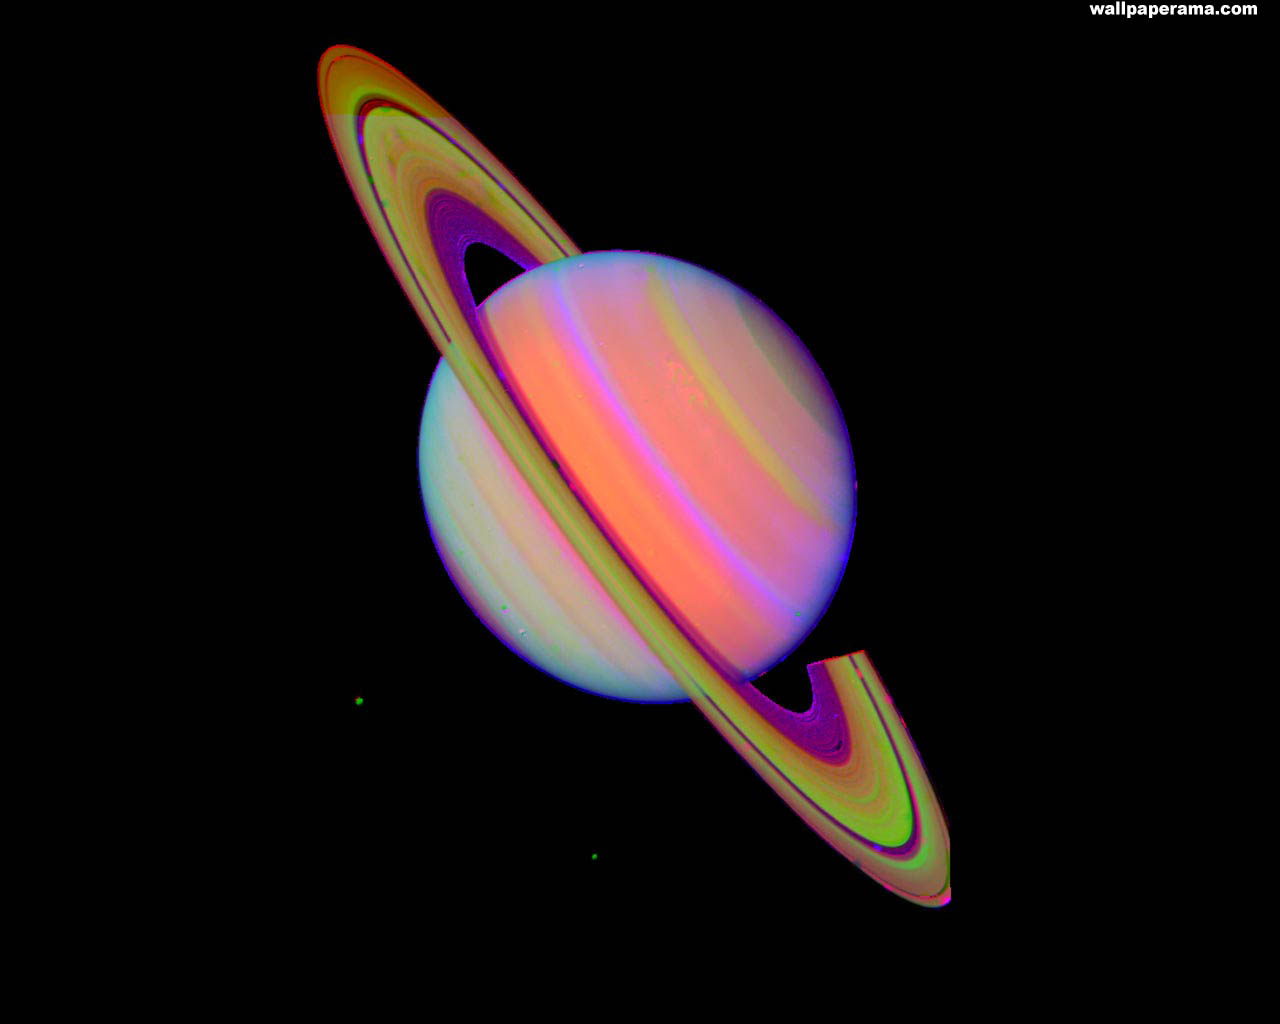 Infrared Saturn Wallpaper HD Background Image Pictures